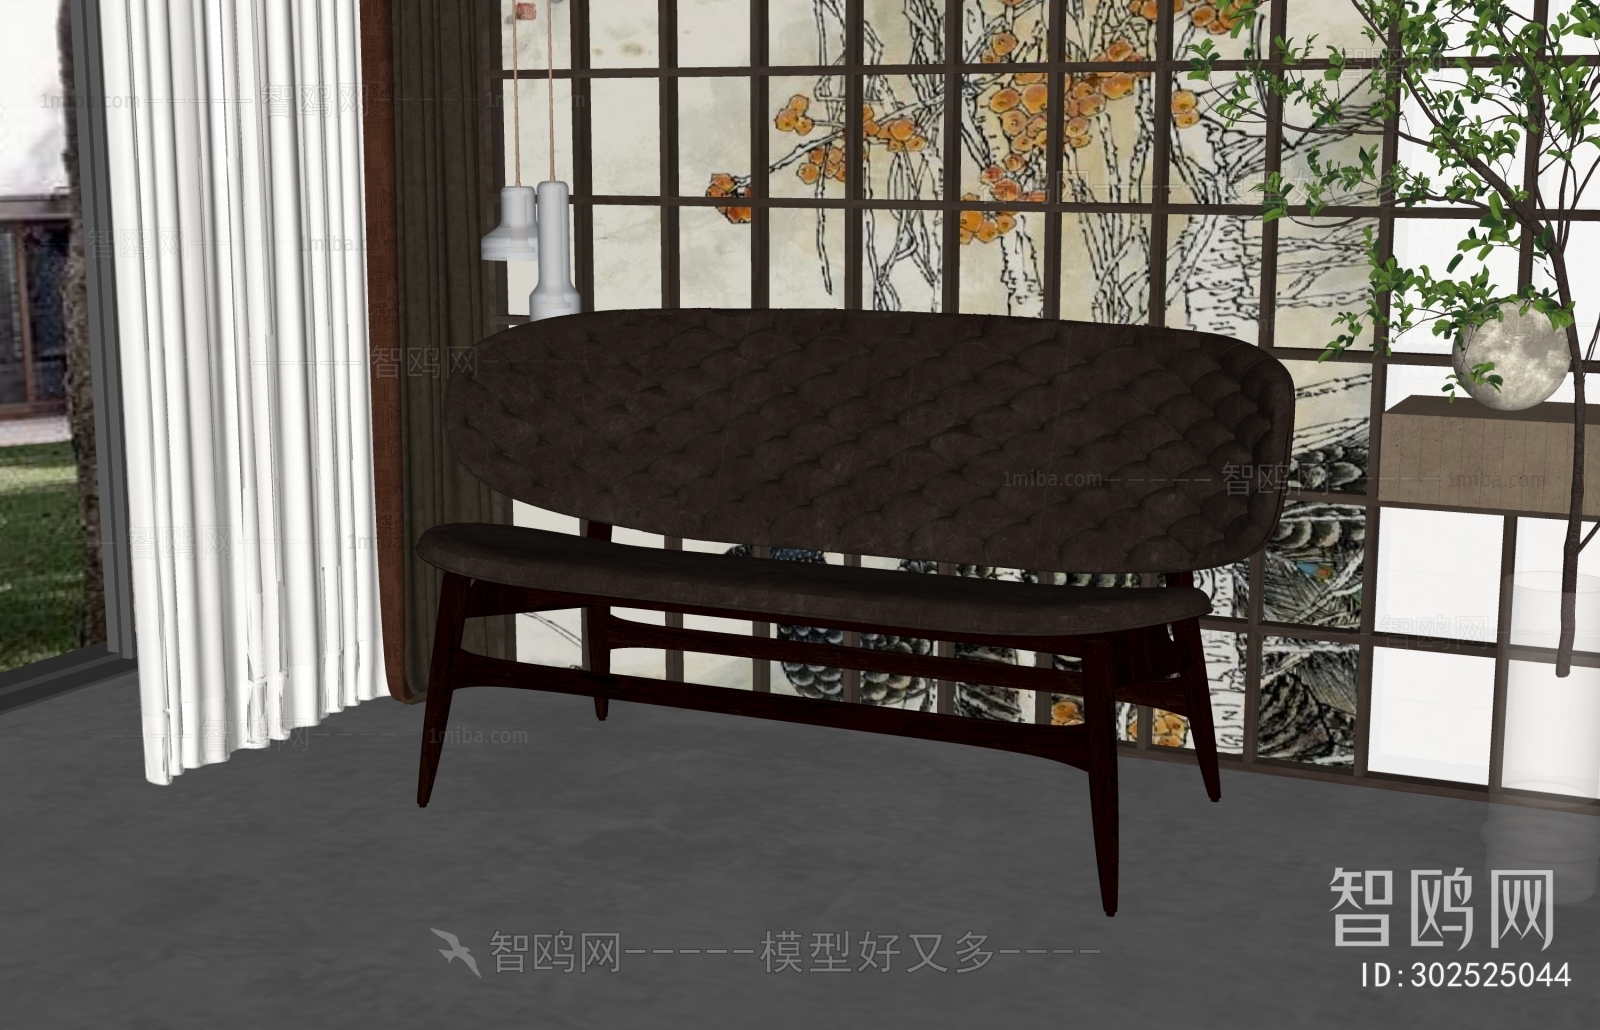 New Chinese Style Card Seat Sofa